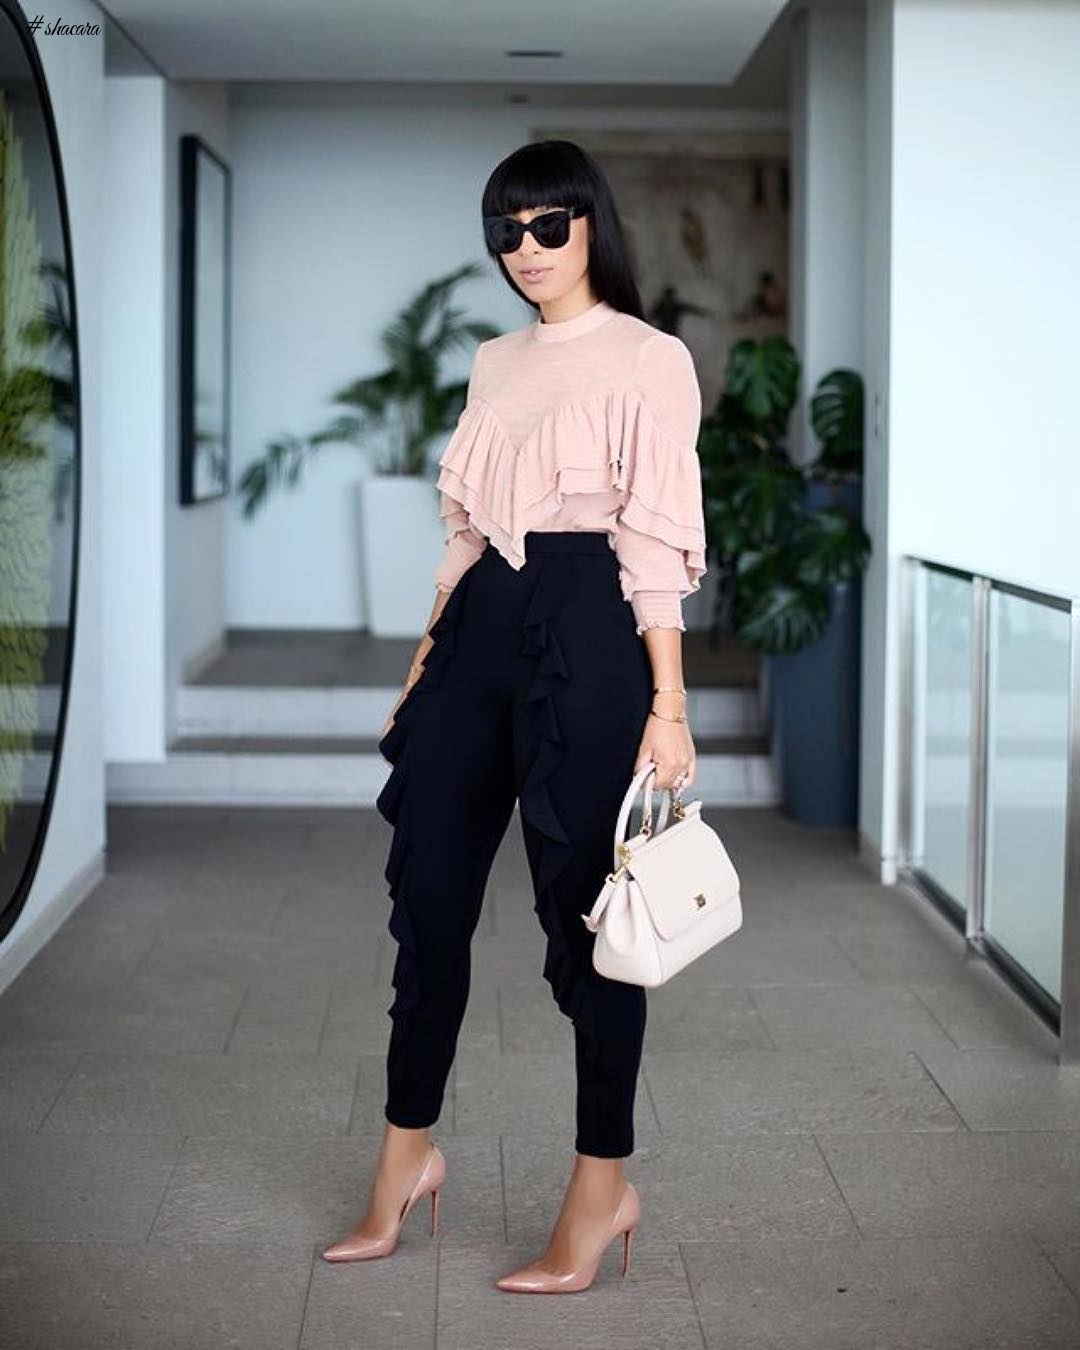 SEE THE CORPORATE ATTIRES THAT FASHIONISTAS ARE ROCKING THIS TIME!